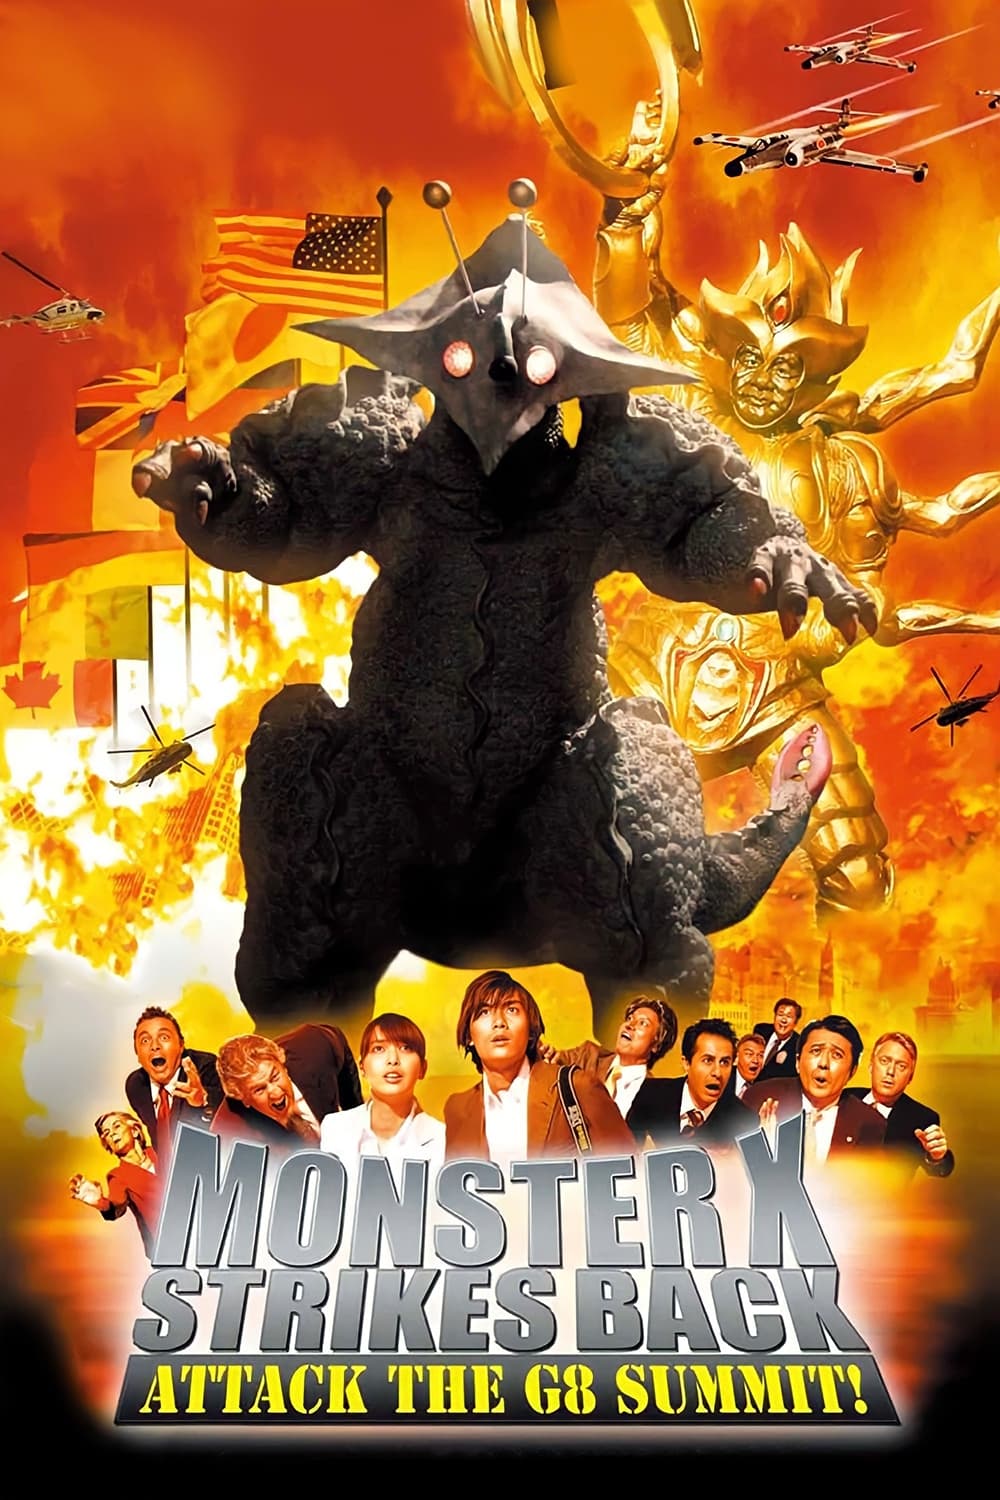 The Monster X Strikes Back: Attack the G8 Summit